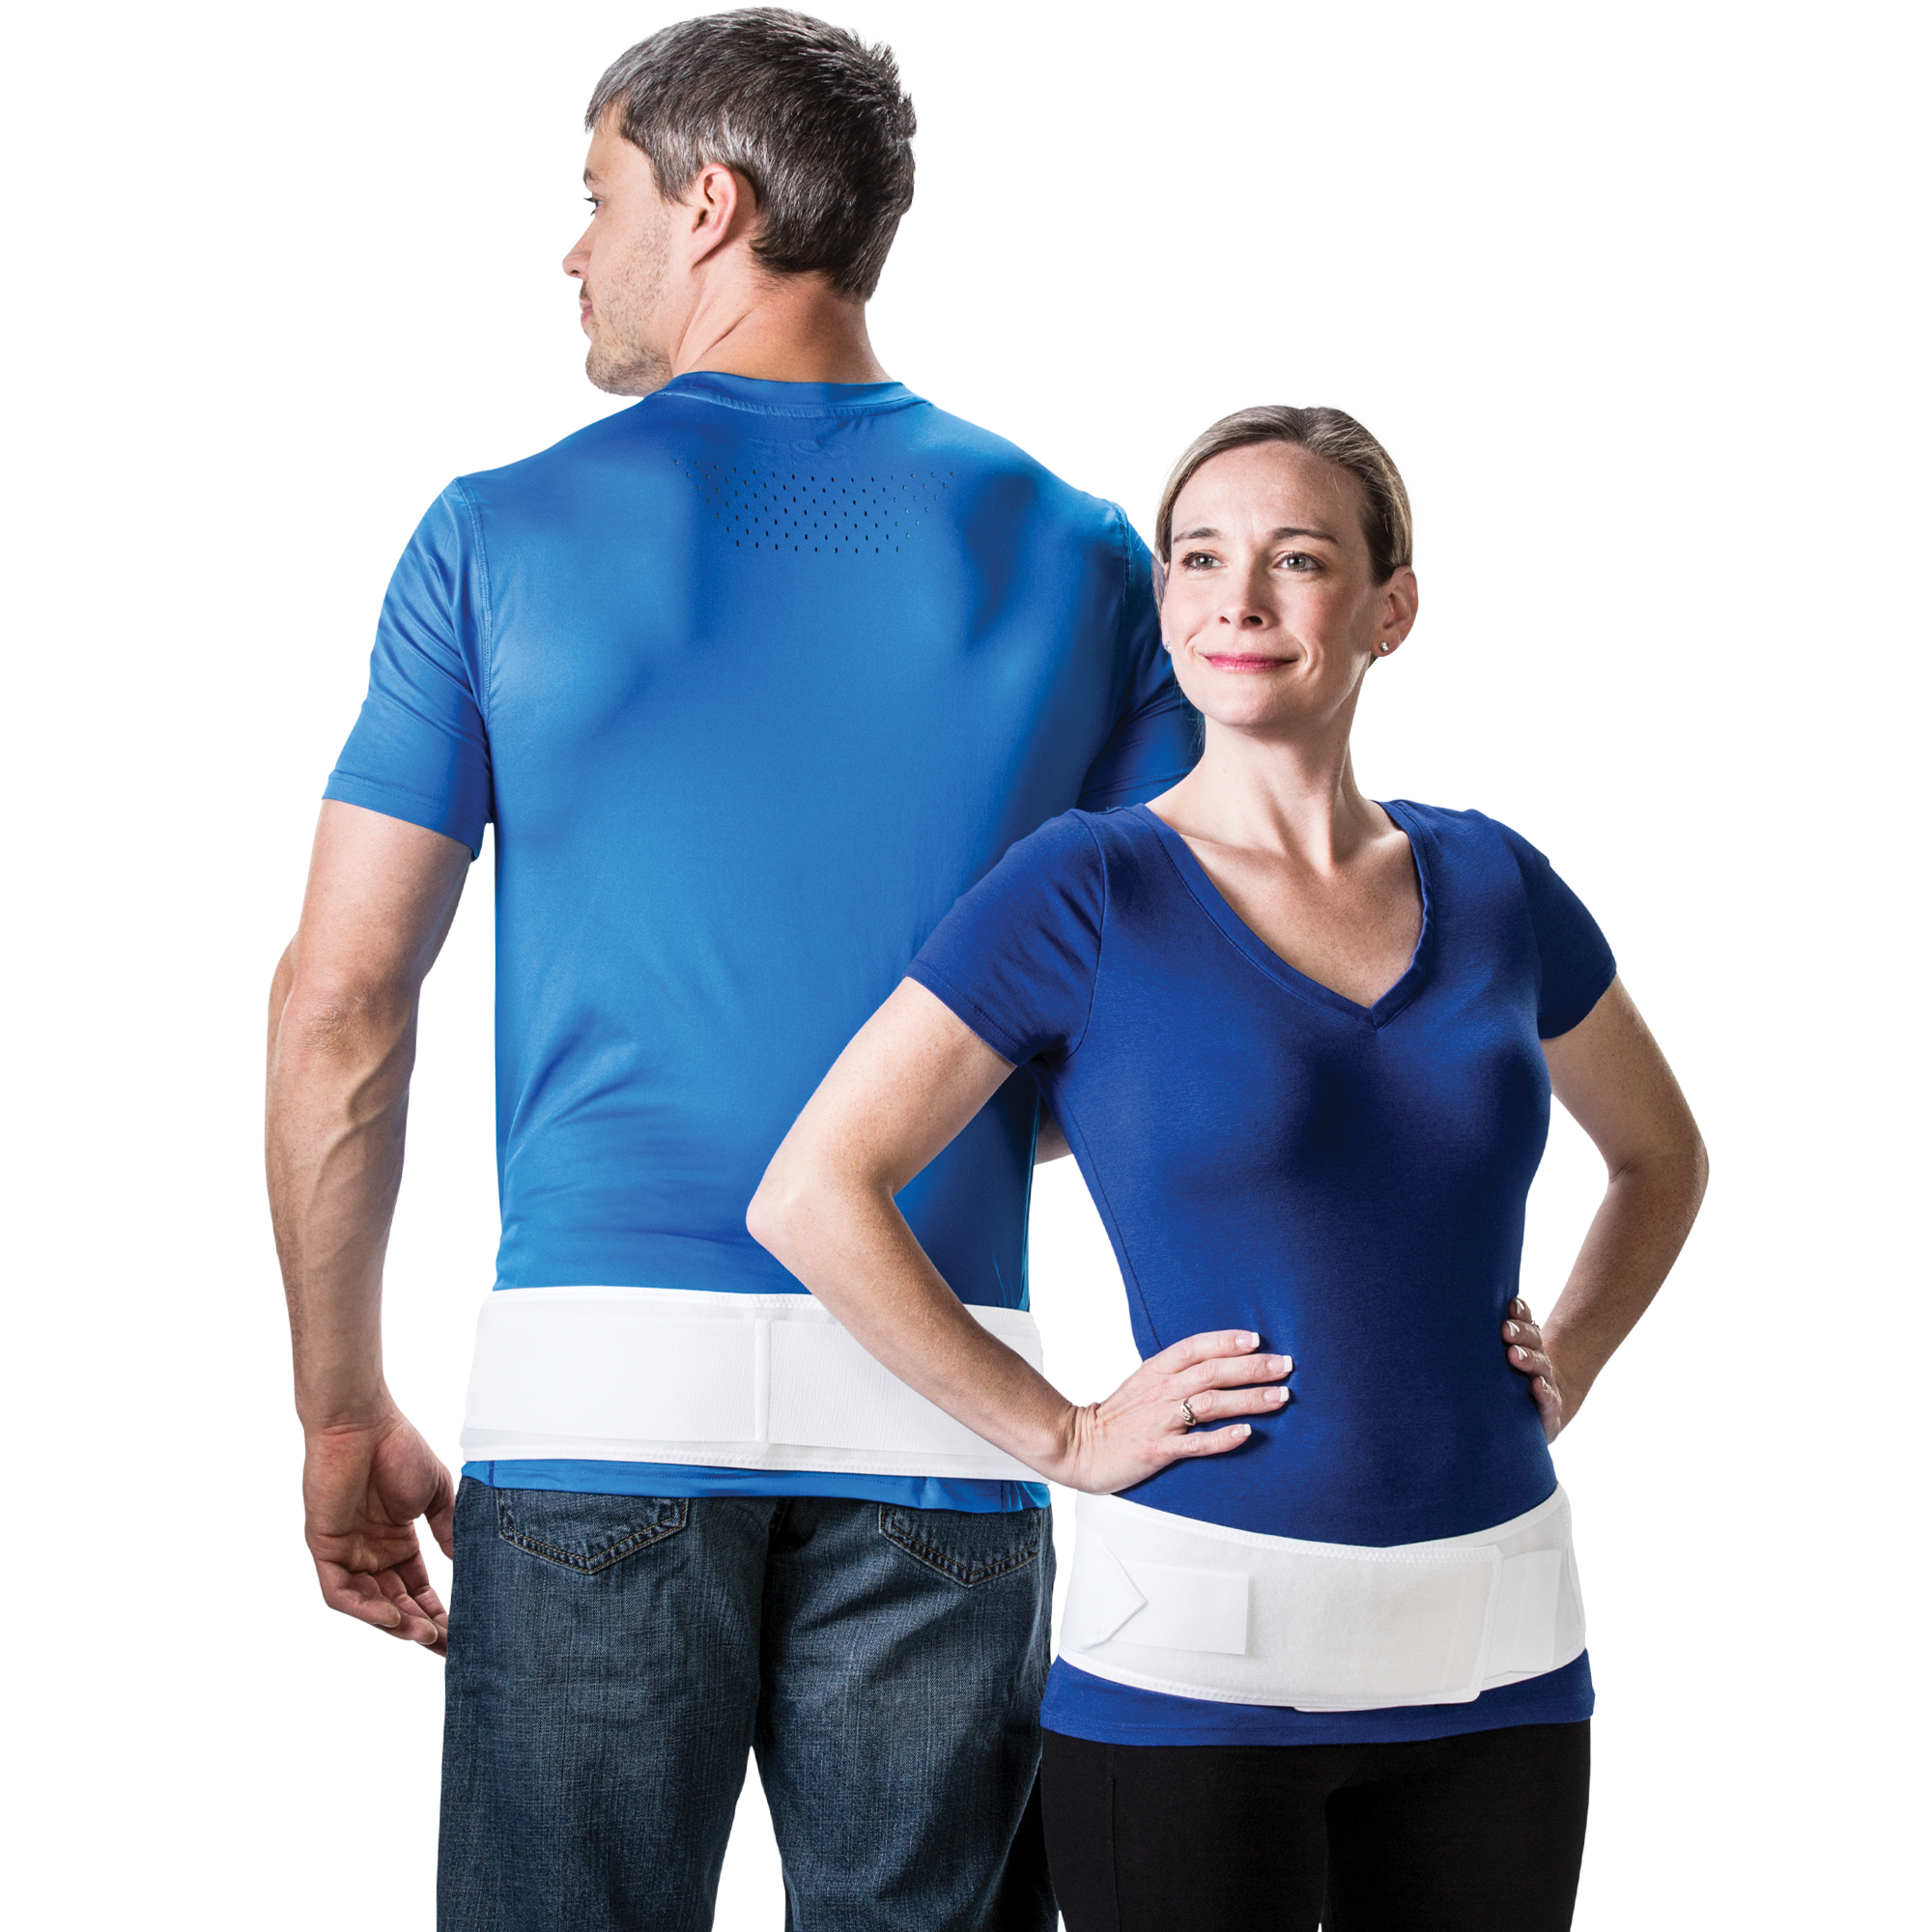 Sacroiliac Spinal Support - physio supplies canada